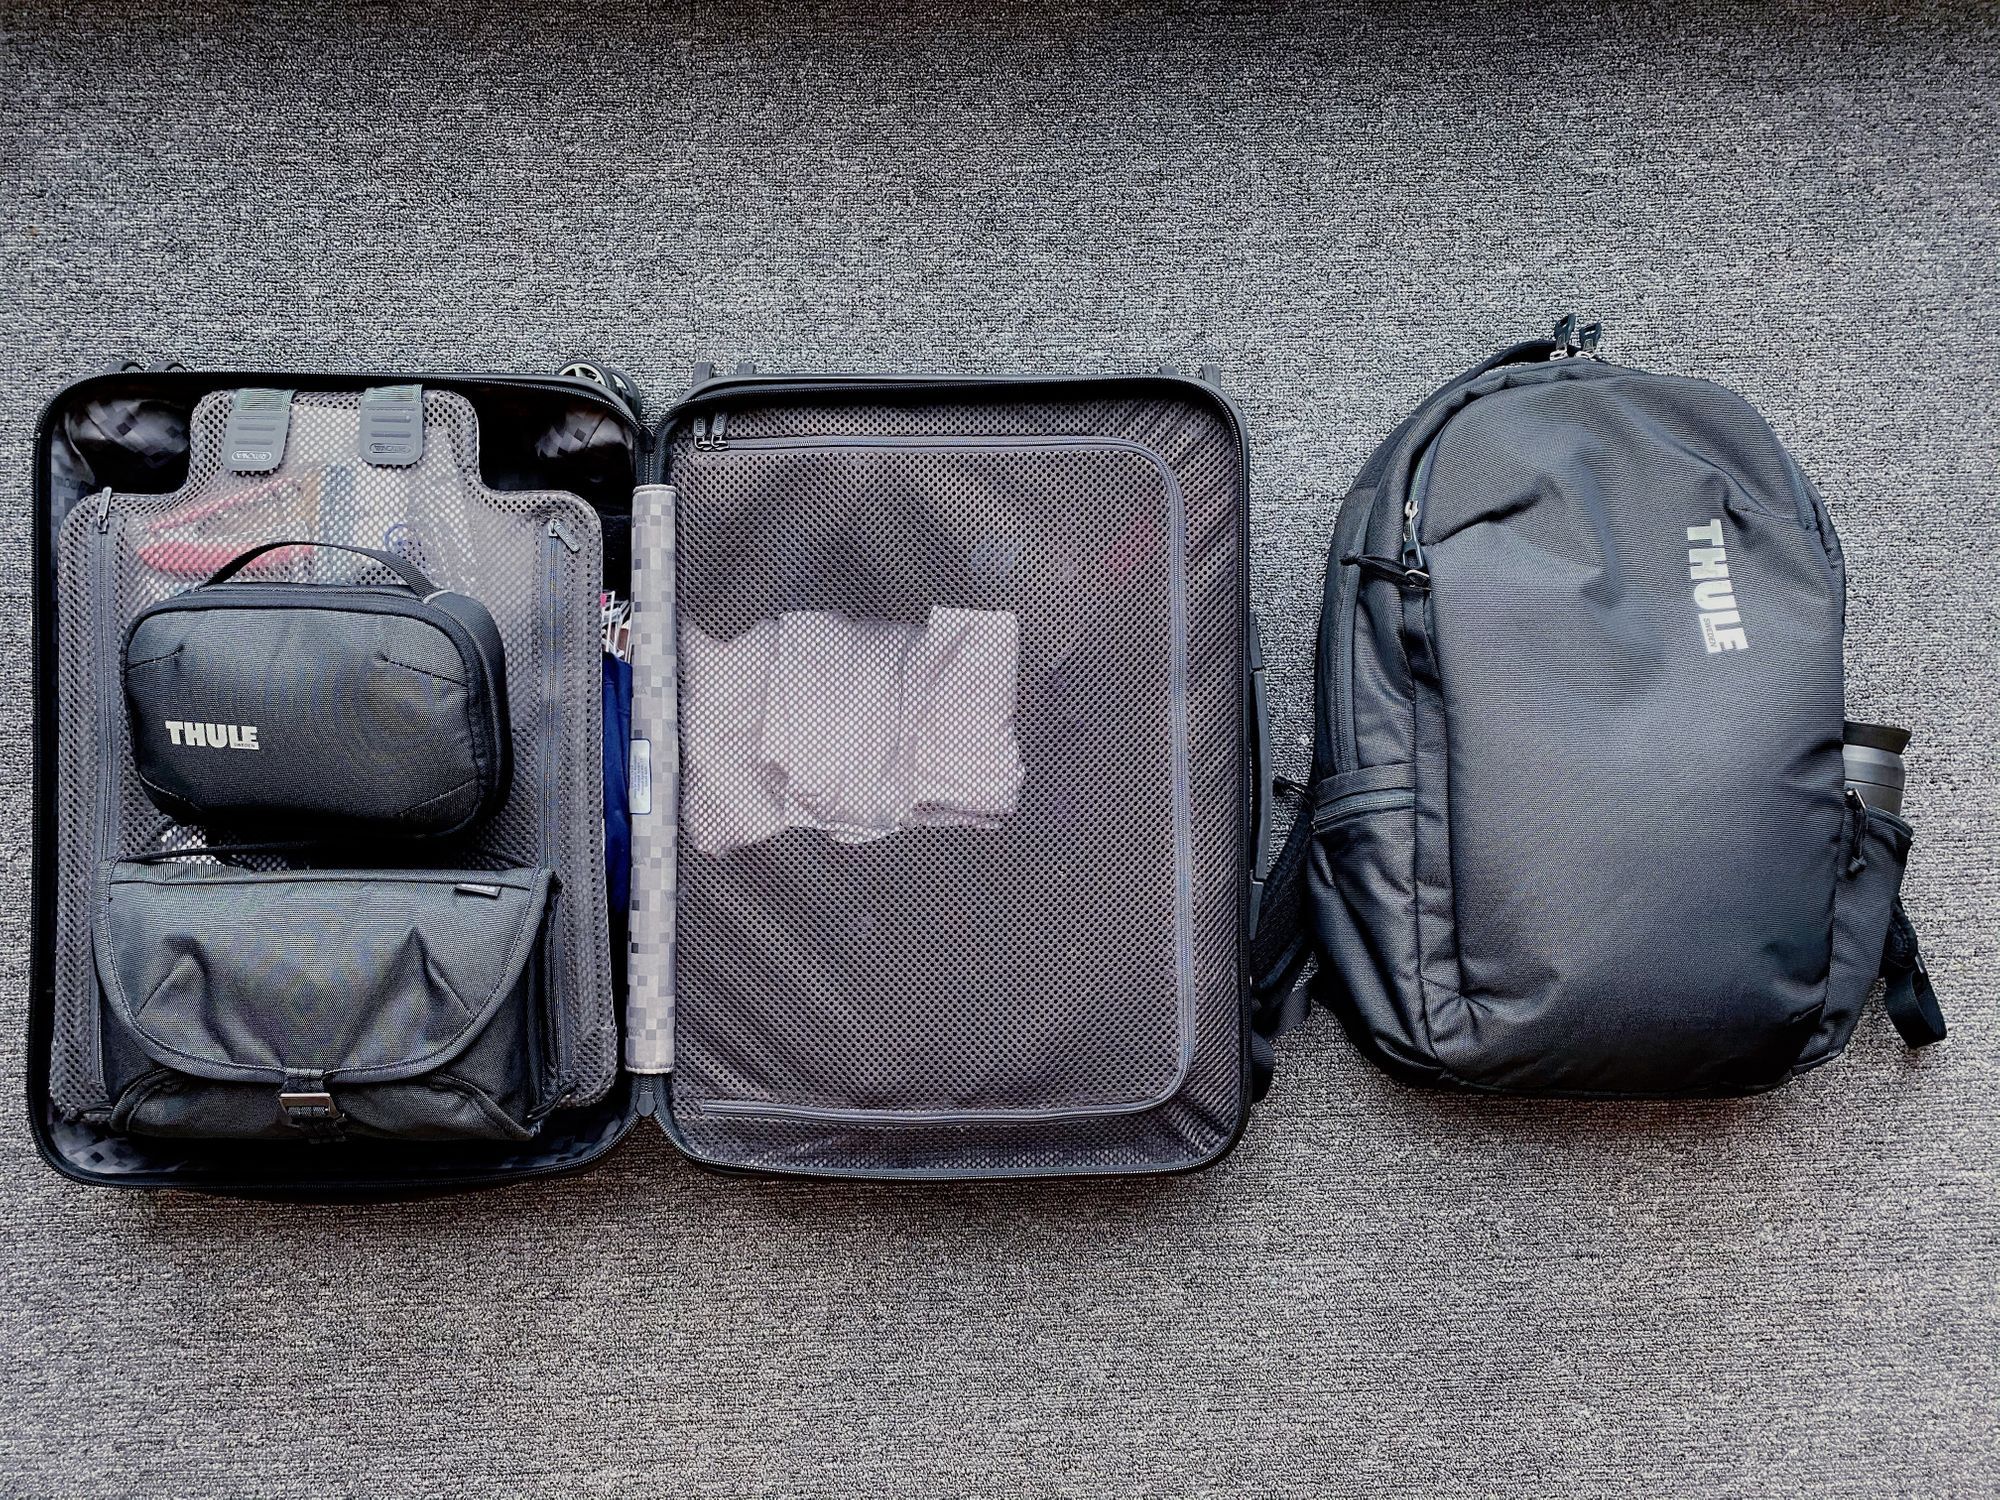 Everything I own fits into a cabin-sized luggage & 20L backpack